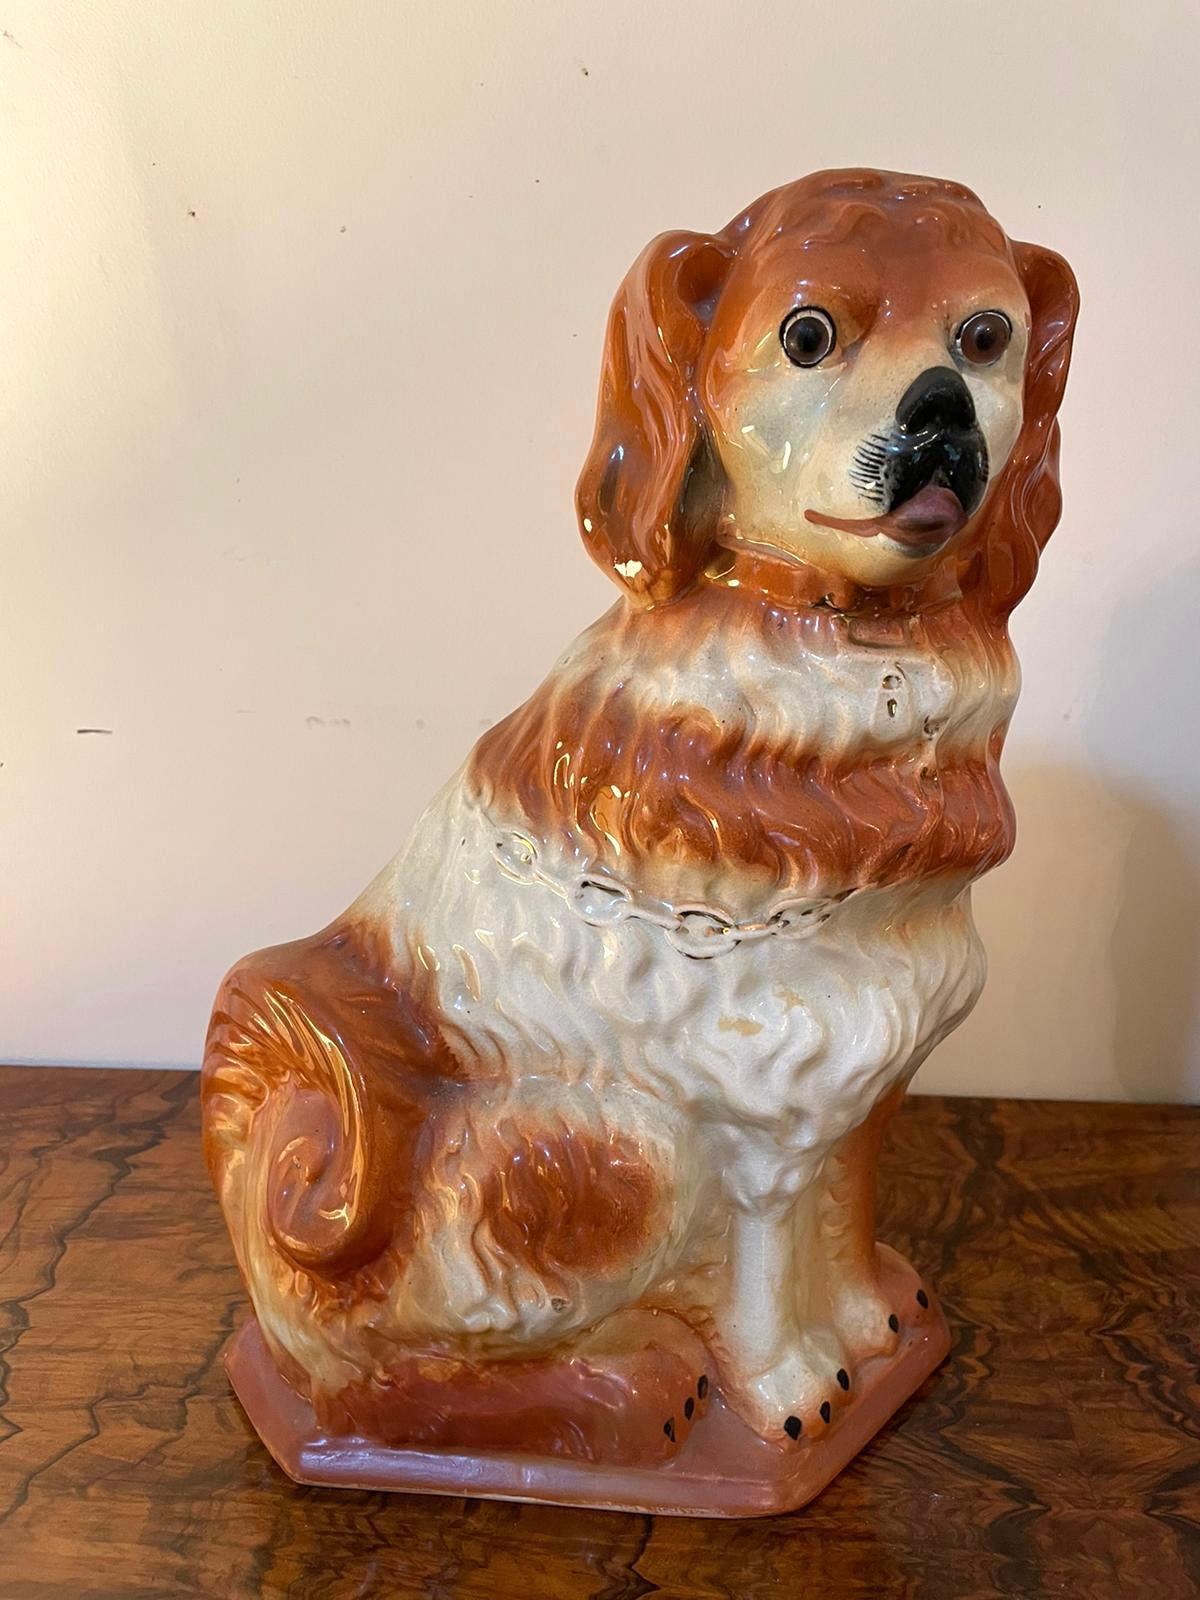 Large pair of antique Victorian Staffordshire dogs having matching collars, padlocks and chains, the brown and white Spaniels are seated and have glass eyes.

Very attractive pair in lovely original condition.

Measures: H 32.5cm 
W 22.5cm 
D